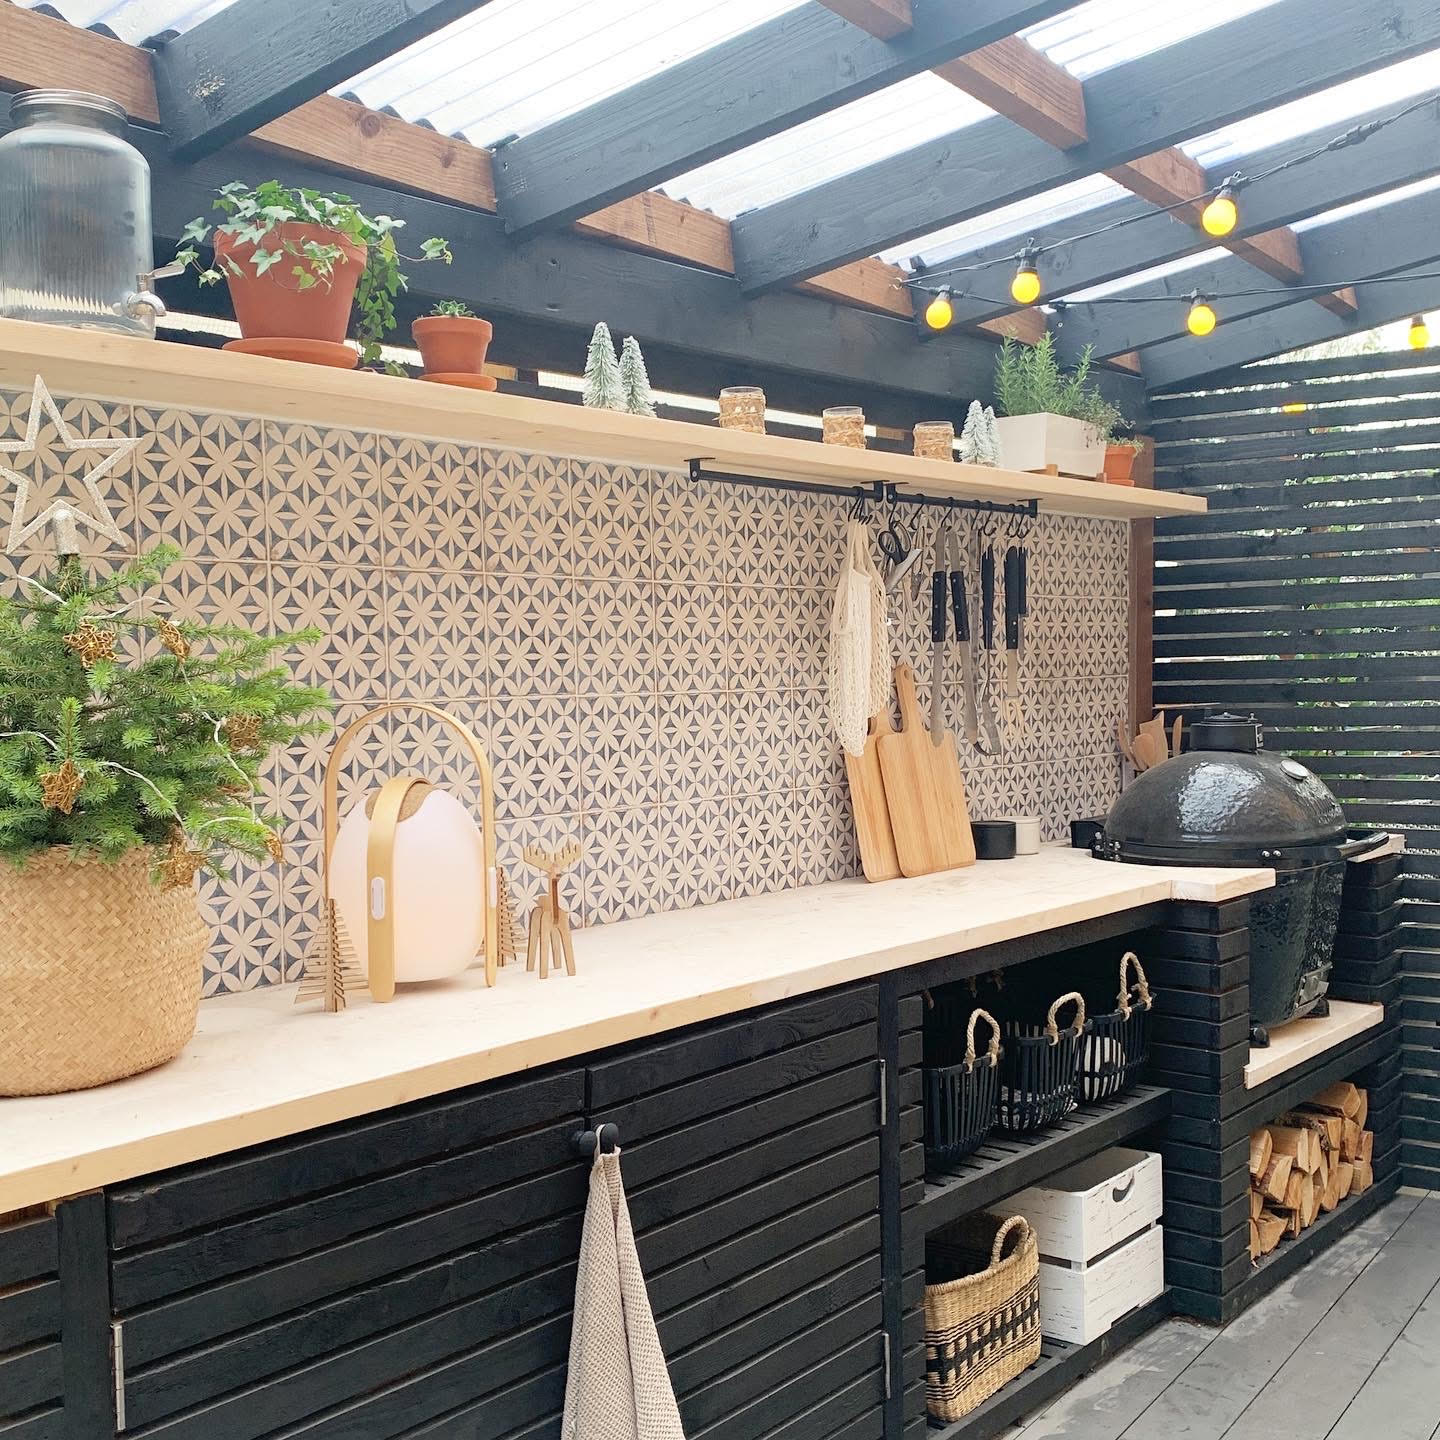 20 Outdoor Kitchen Ideas With Photos of Inspiring Spaces ...